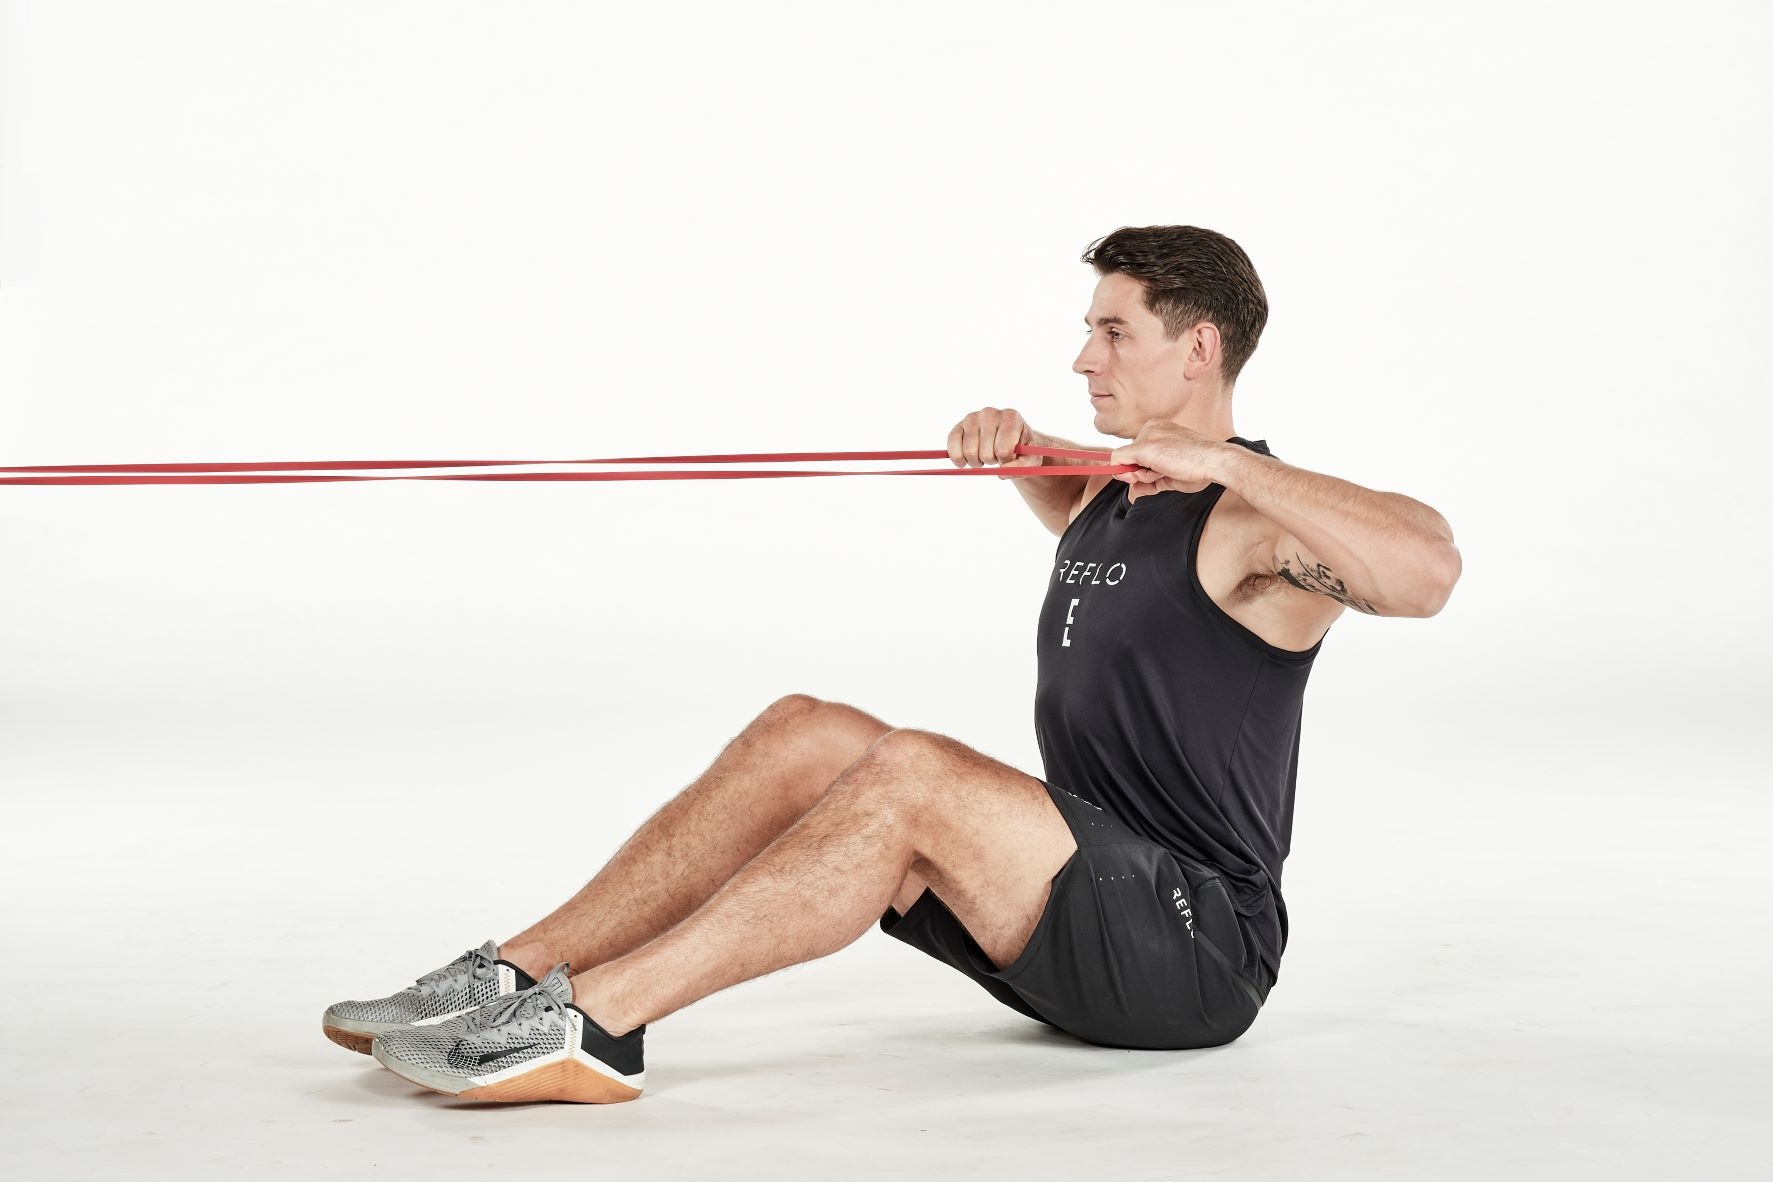 man demonstrating step two of seated face pull; seated with knees bent, he holds a secured band; his arms are bent as he pull the band towards his chest; he wears a black fitness vest, black shorts and trainers